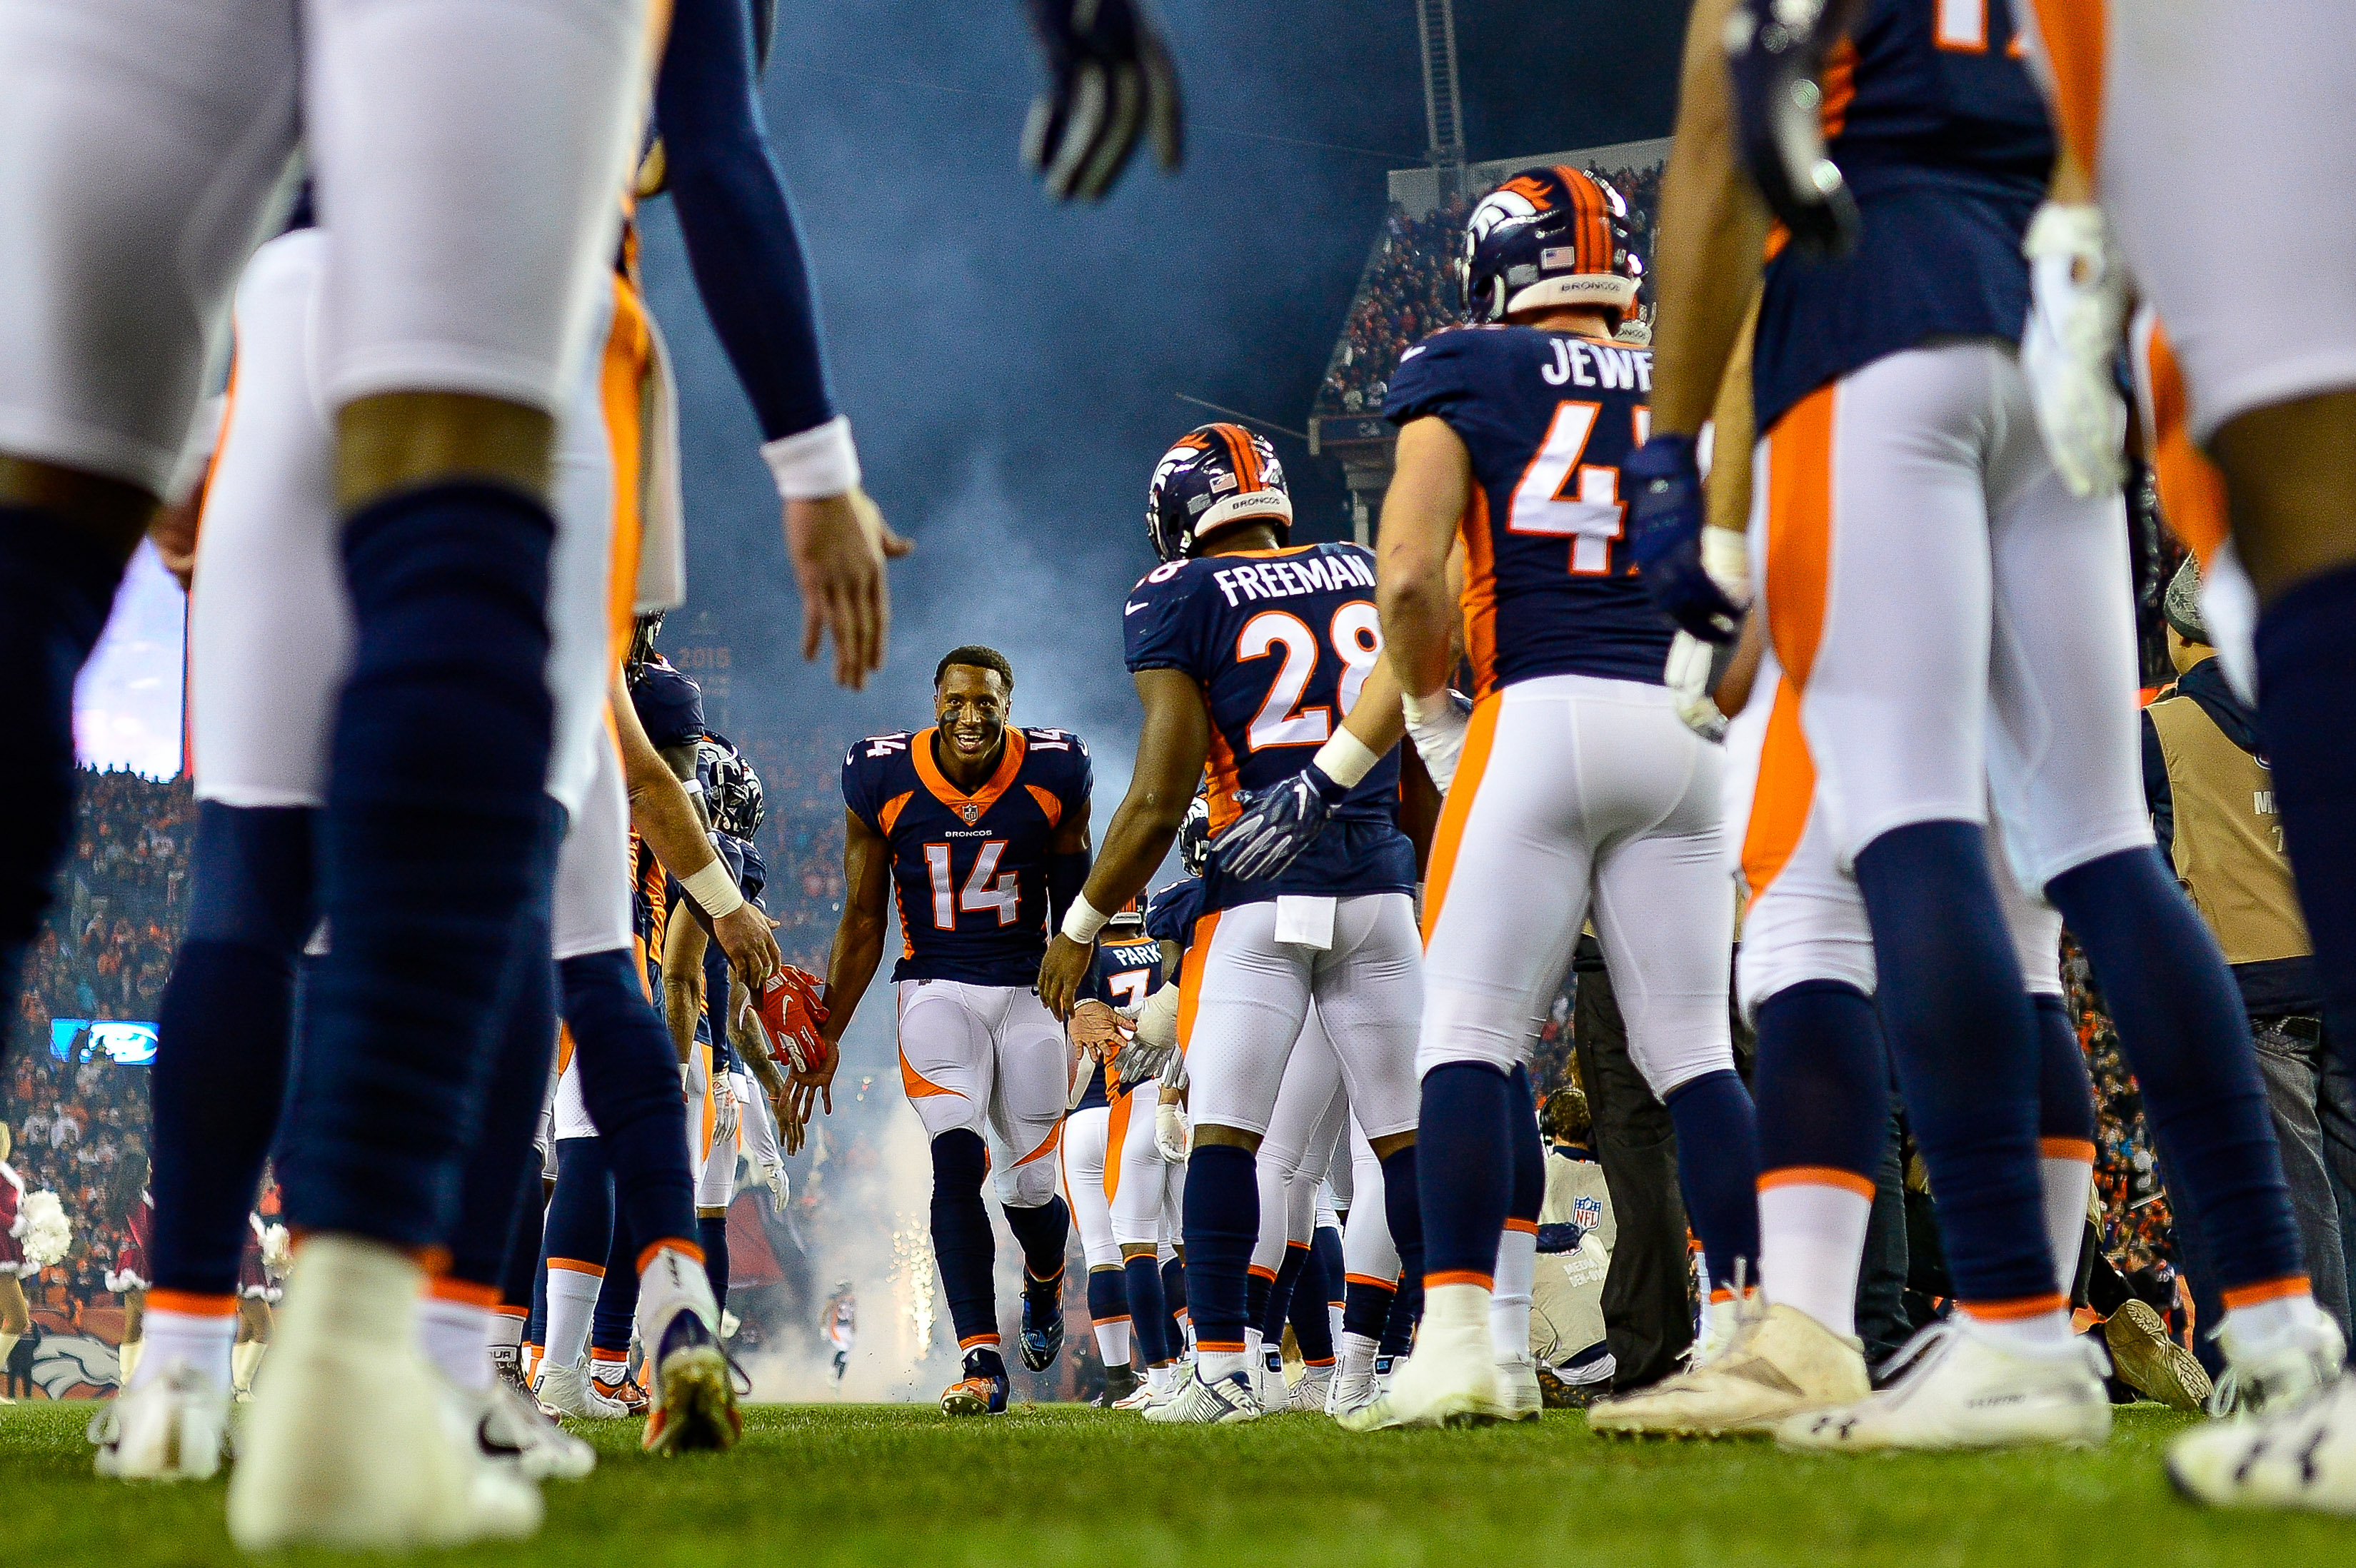 DMac: Final Broncos games not meaningless, but winning not the focus